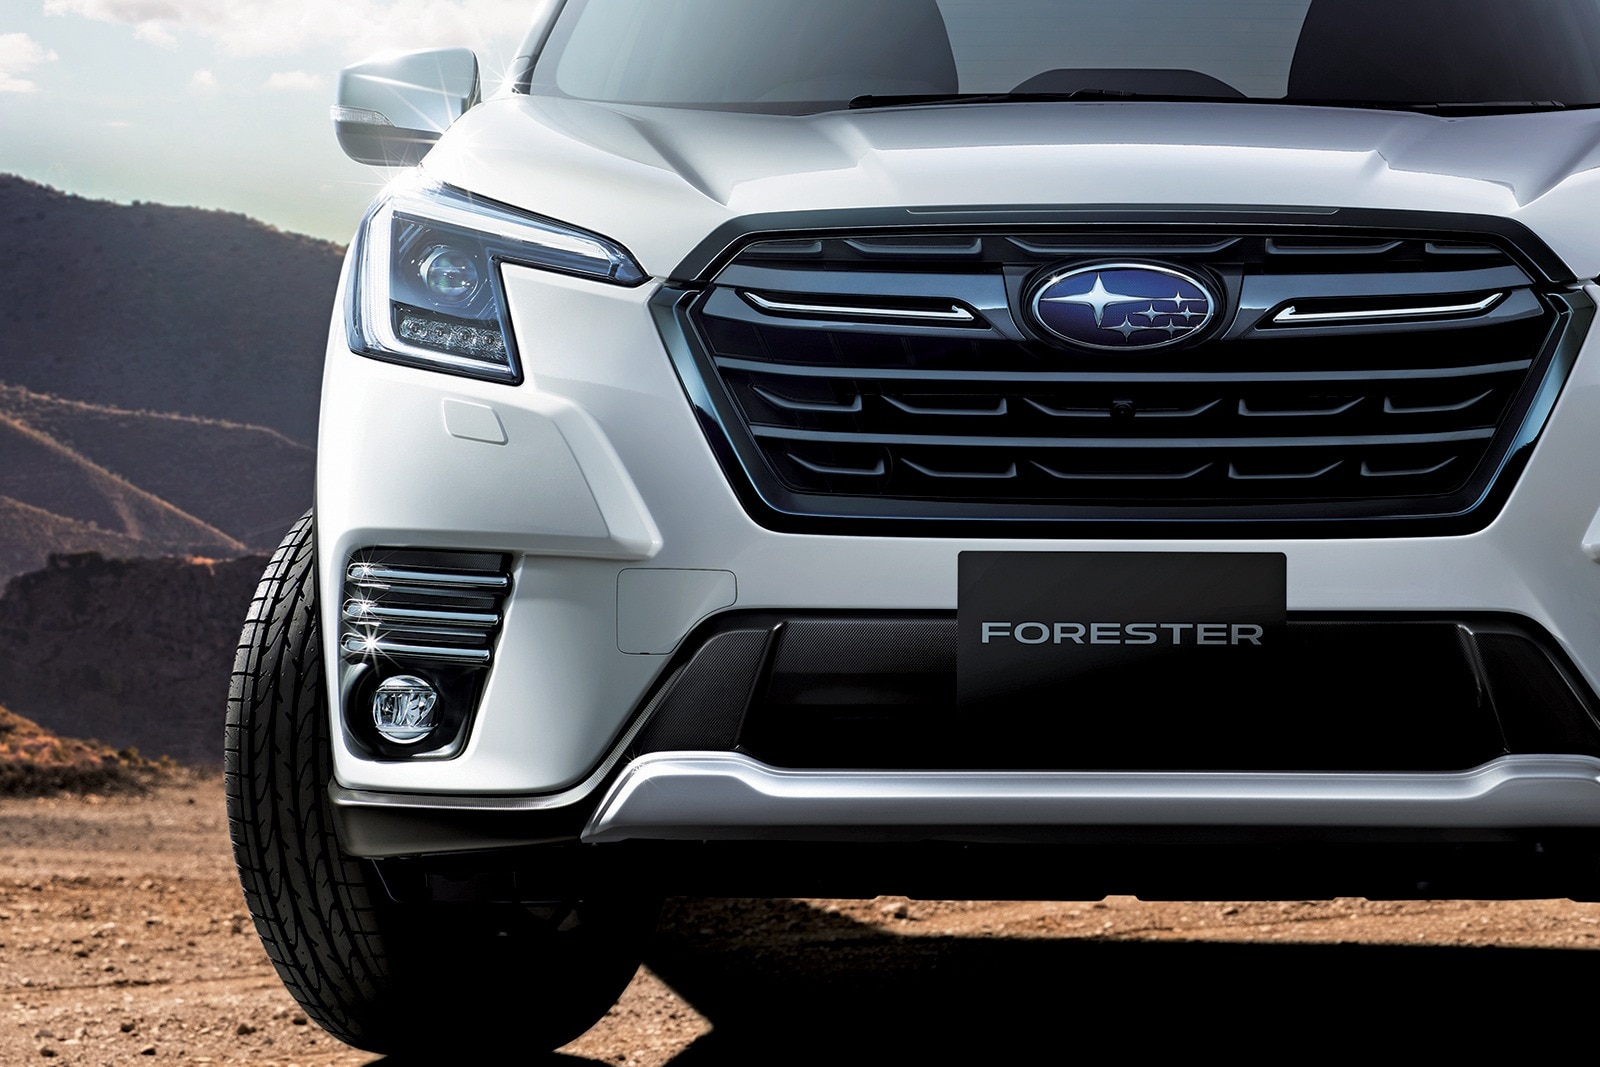 Subaru Forester Midcycle Refresh: What’s New for 2022